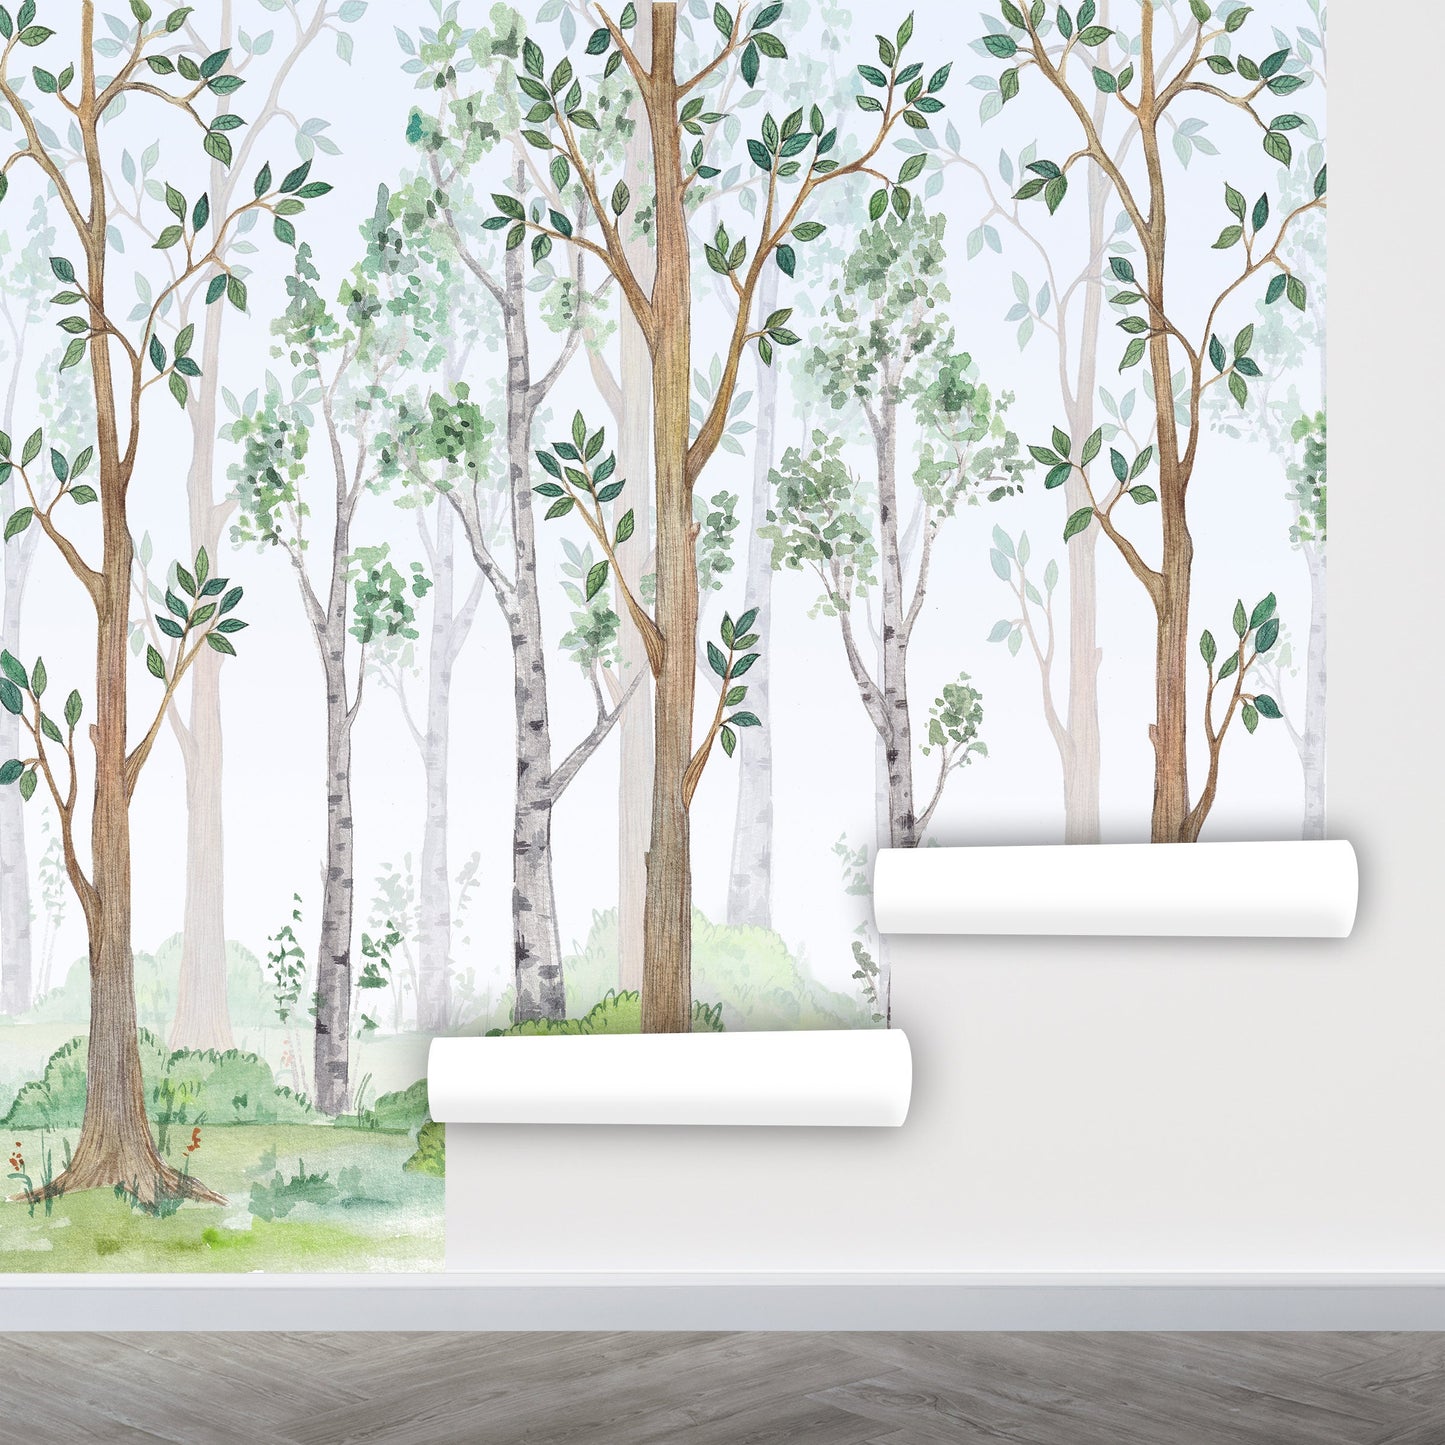 Magic Forest Wallpaper Peel and Stick, Kids Room Wallpaper, Removable Wall Paper